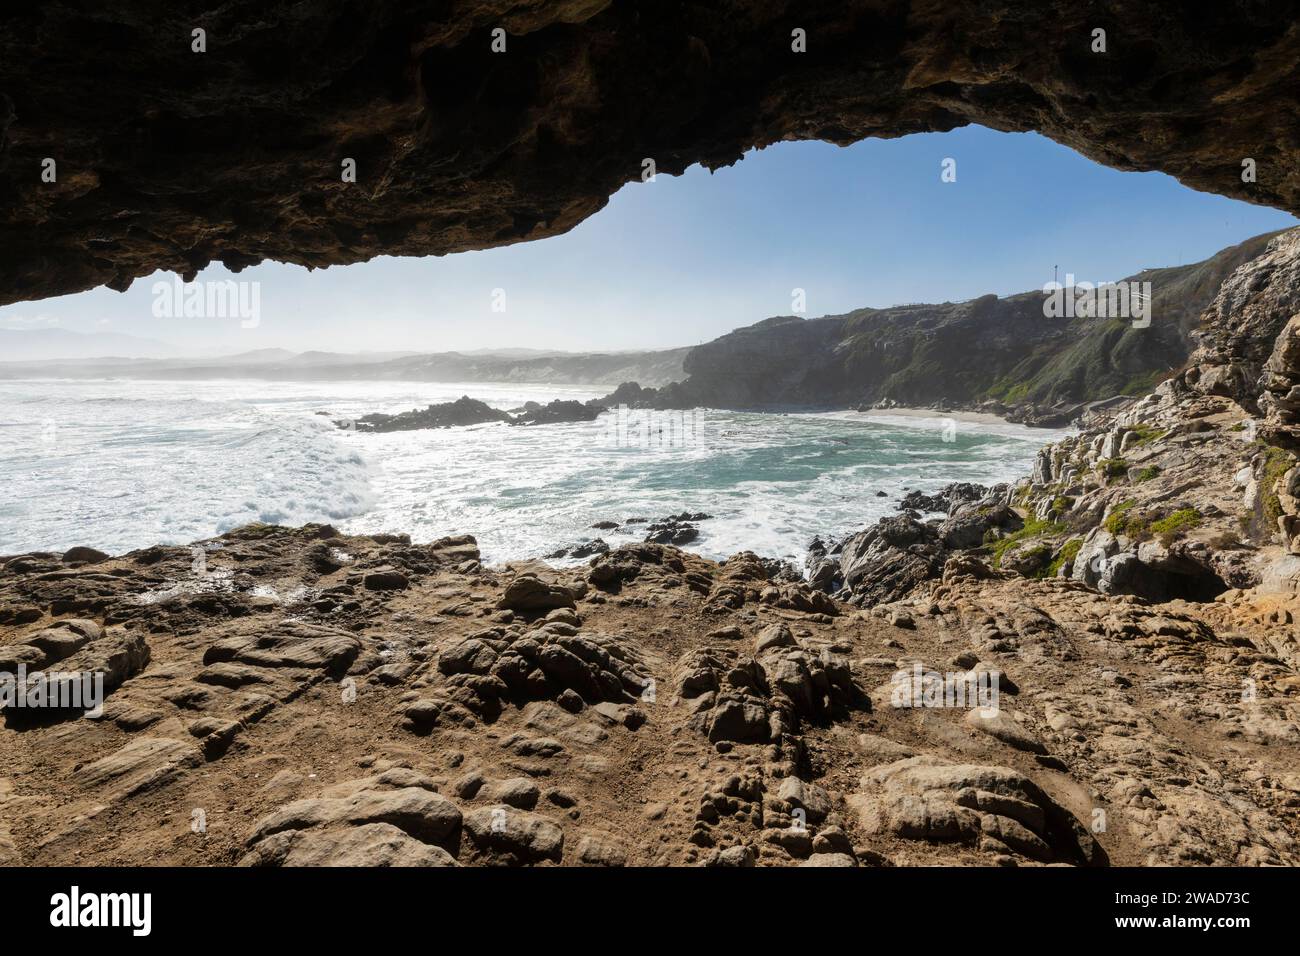 South Africa, Hermanus, Sea and rocky coast in Walker Bay Nature Reserve Stock Photo